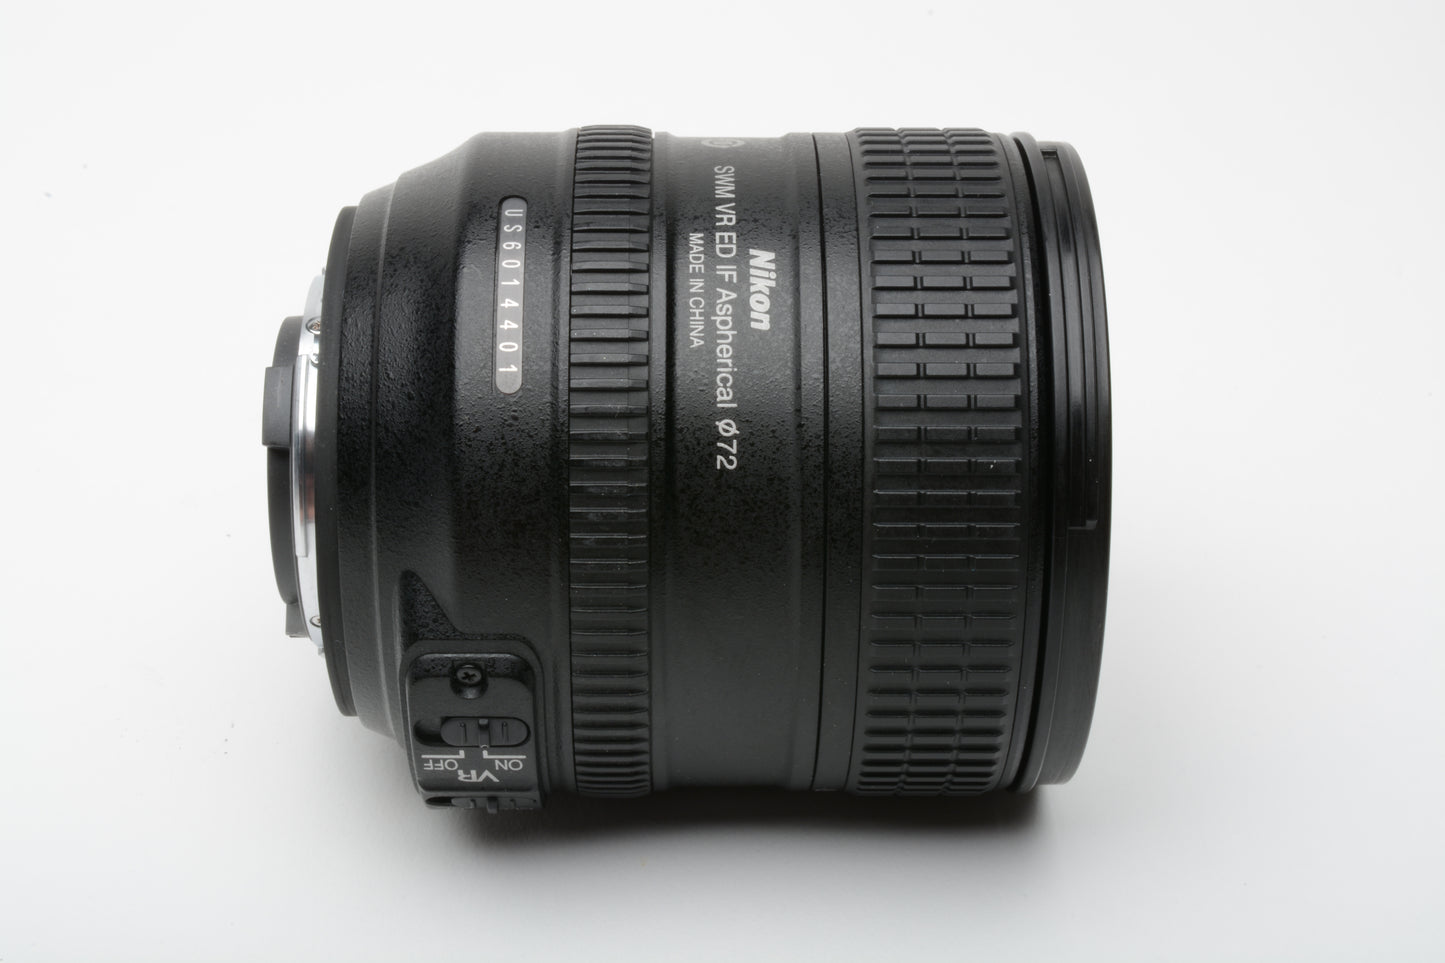 Nikon AF-S 24-85mm f3.5-4.5G ED VR, barely used, hood, very clean and sharp!